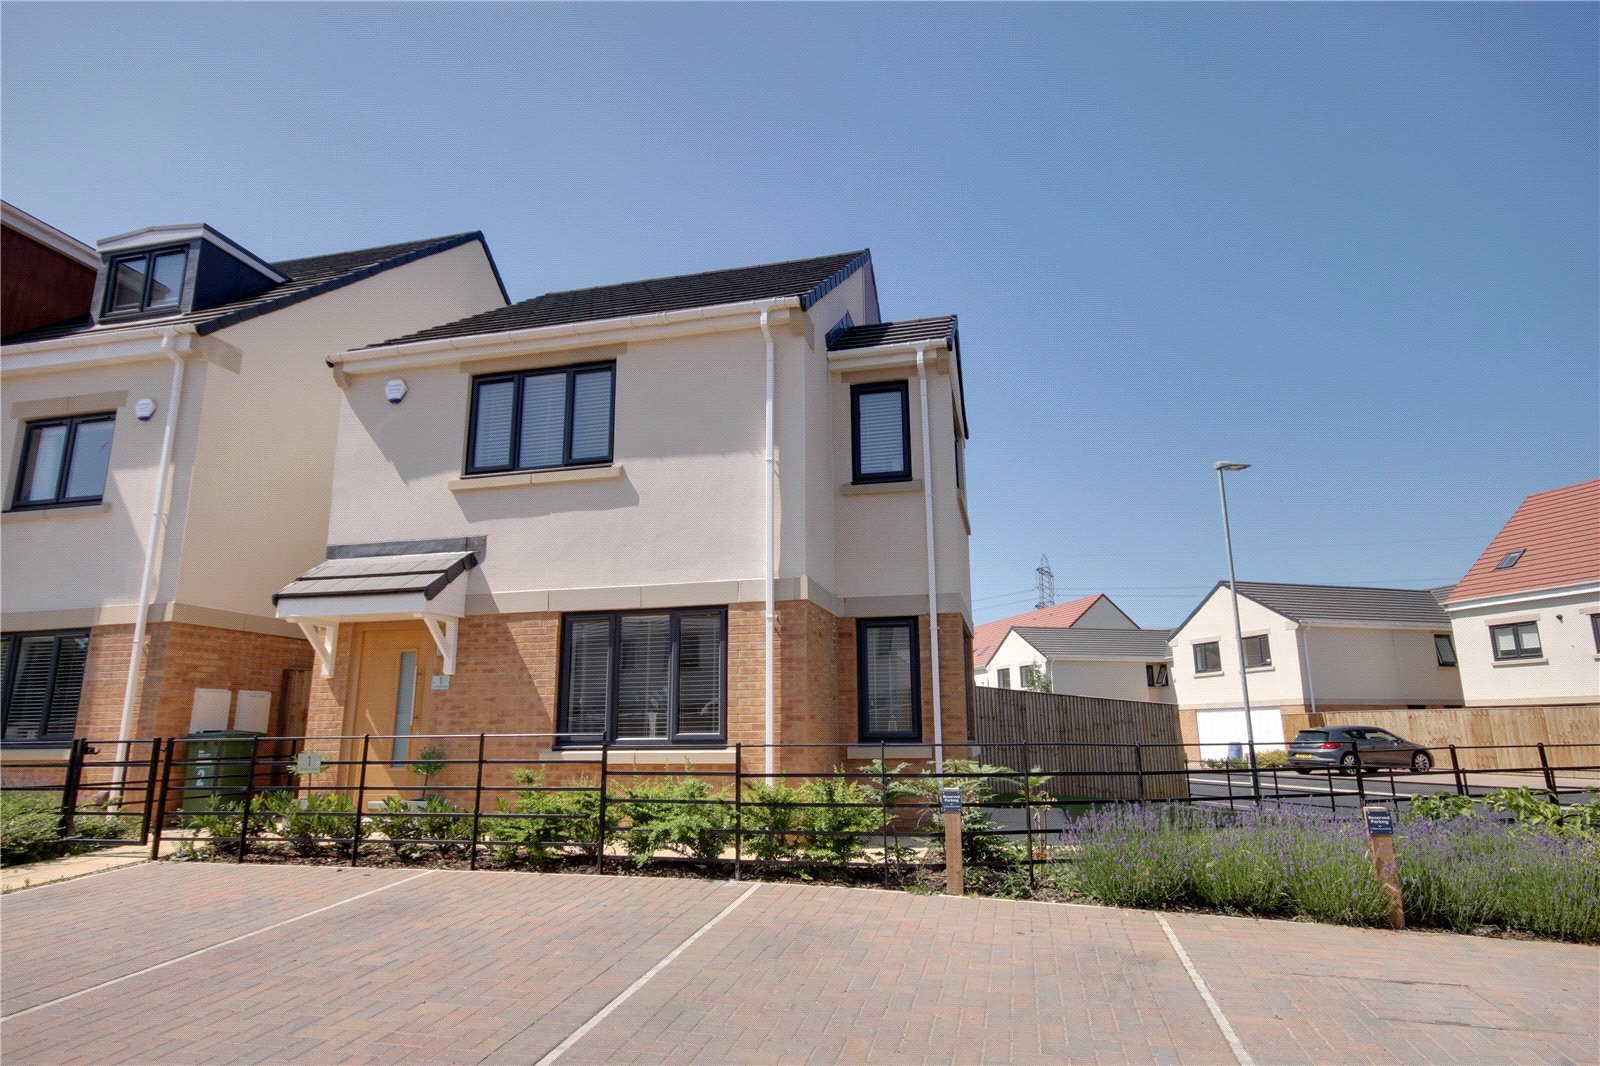 2 bed house for sale in Low Crook Close, Eaglescliffe 1